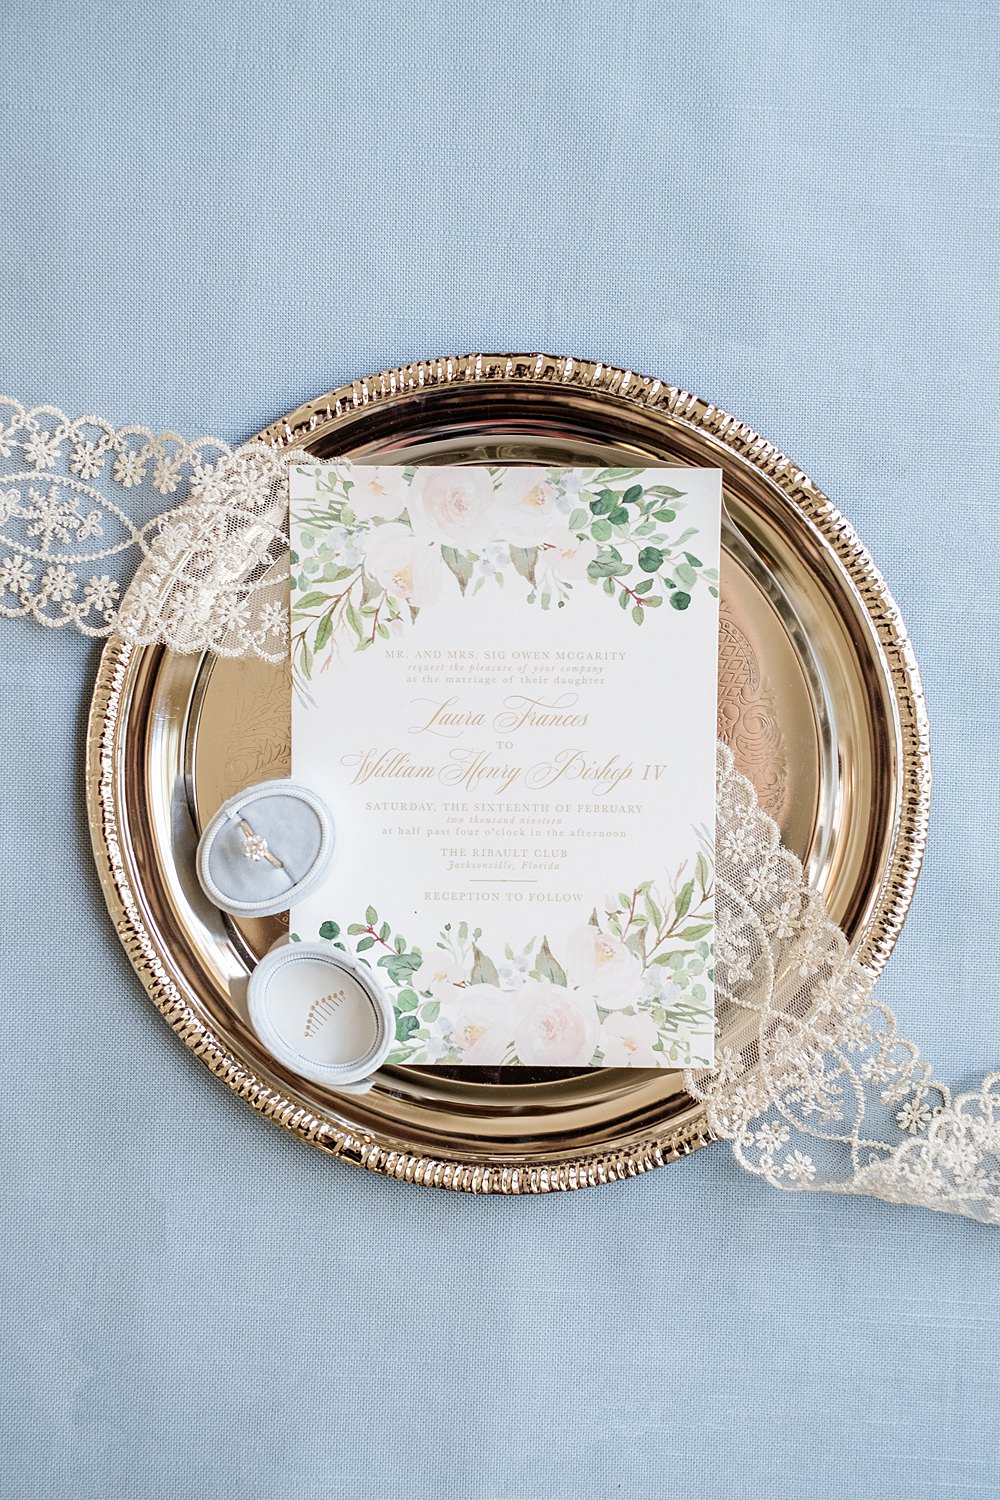 Wedding invitation and ring sit atop a silver tray on a dusty blue background